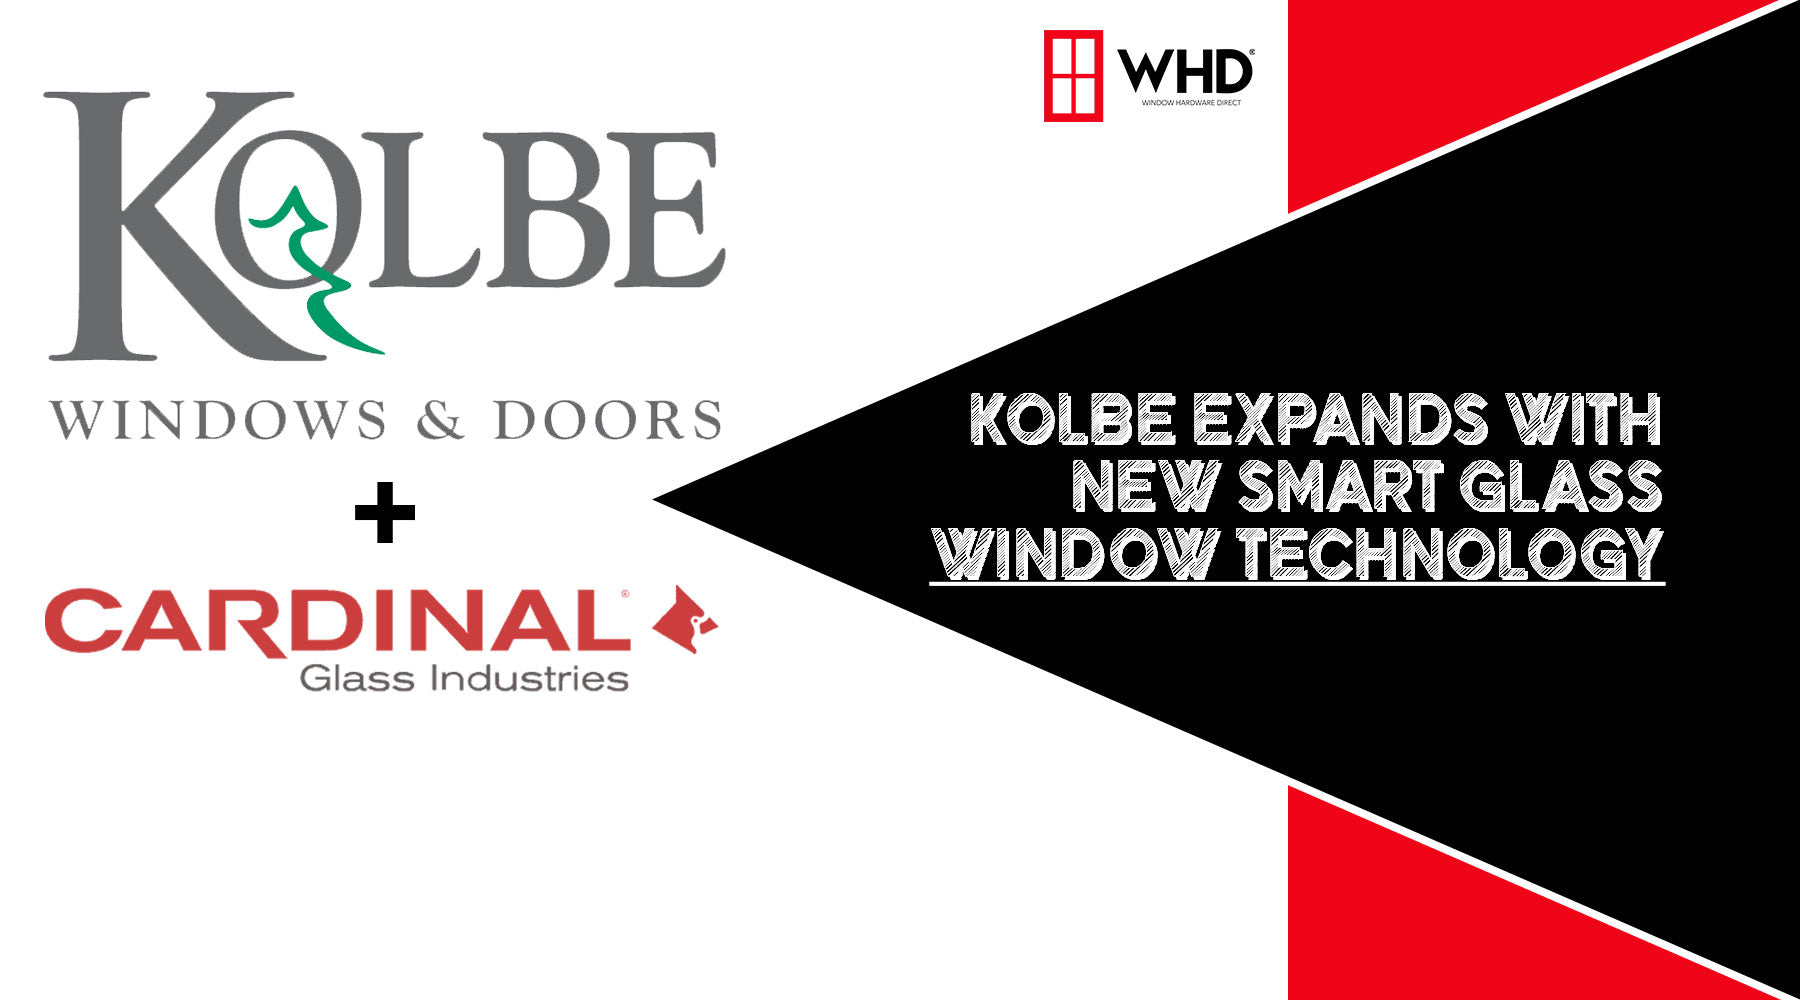 Kolbe's Expansion into Smart Glass Technology: A Window to the Future